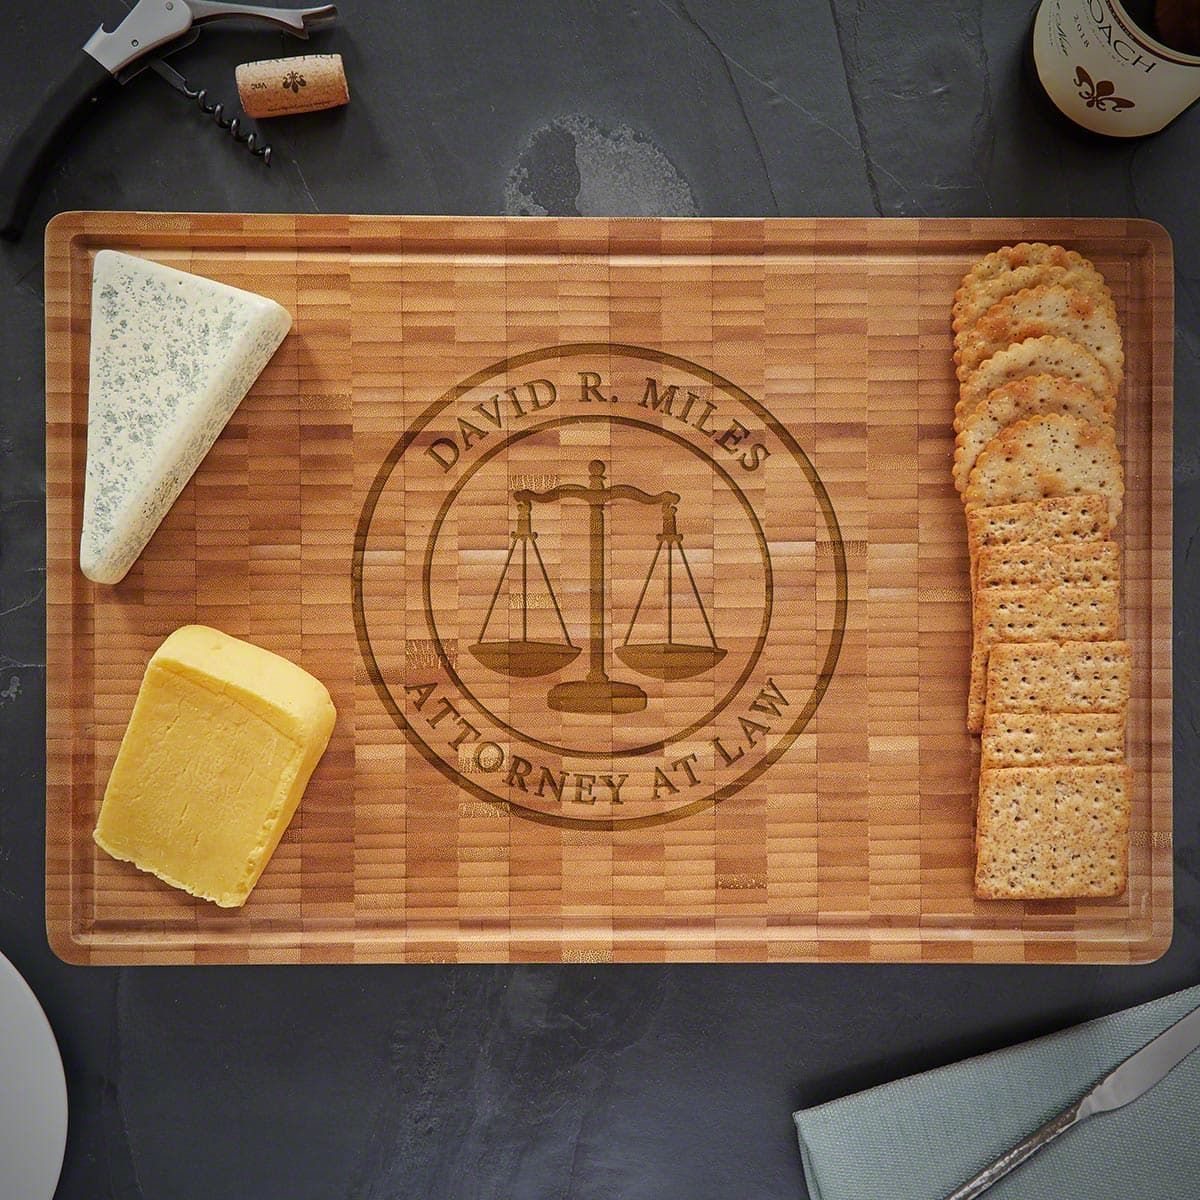 Kitchen Rules Laser Etched Bamboo Cutting Board 